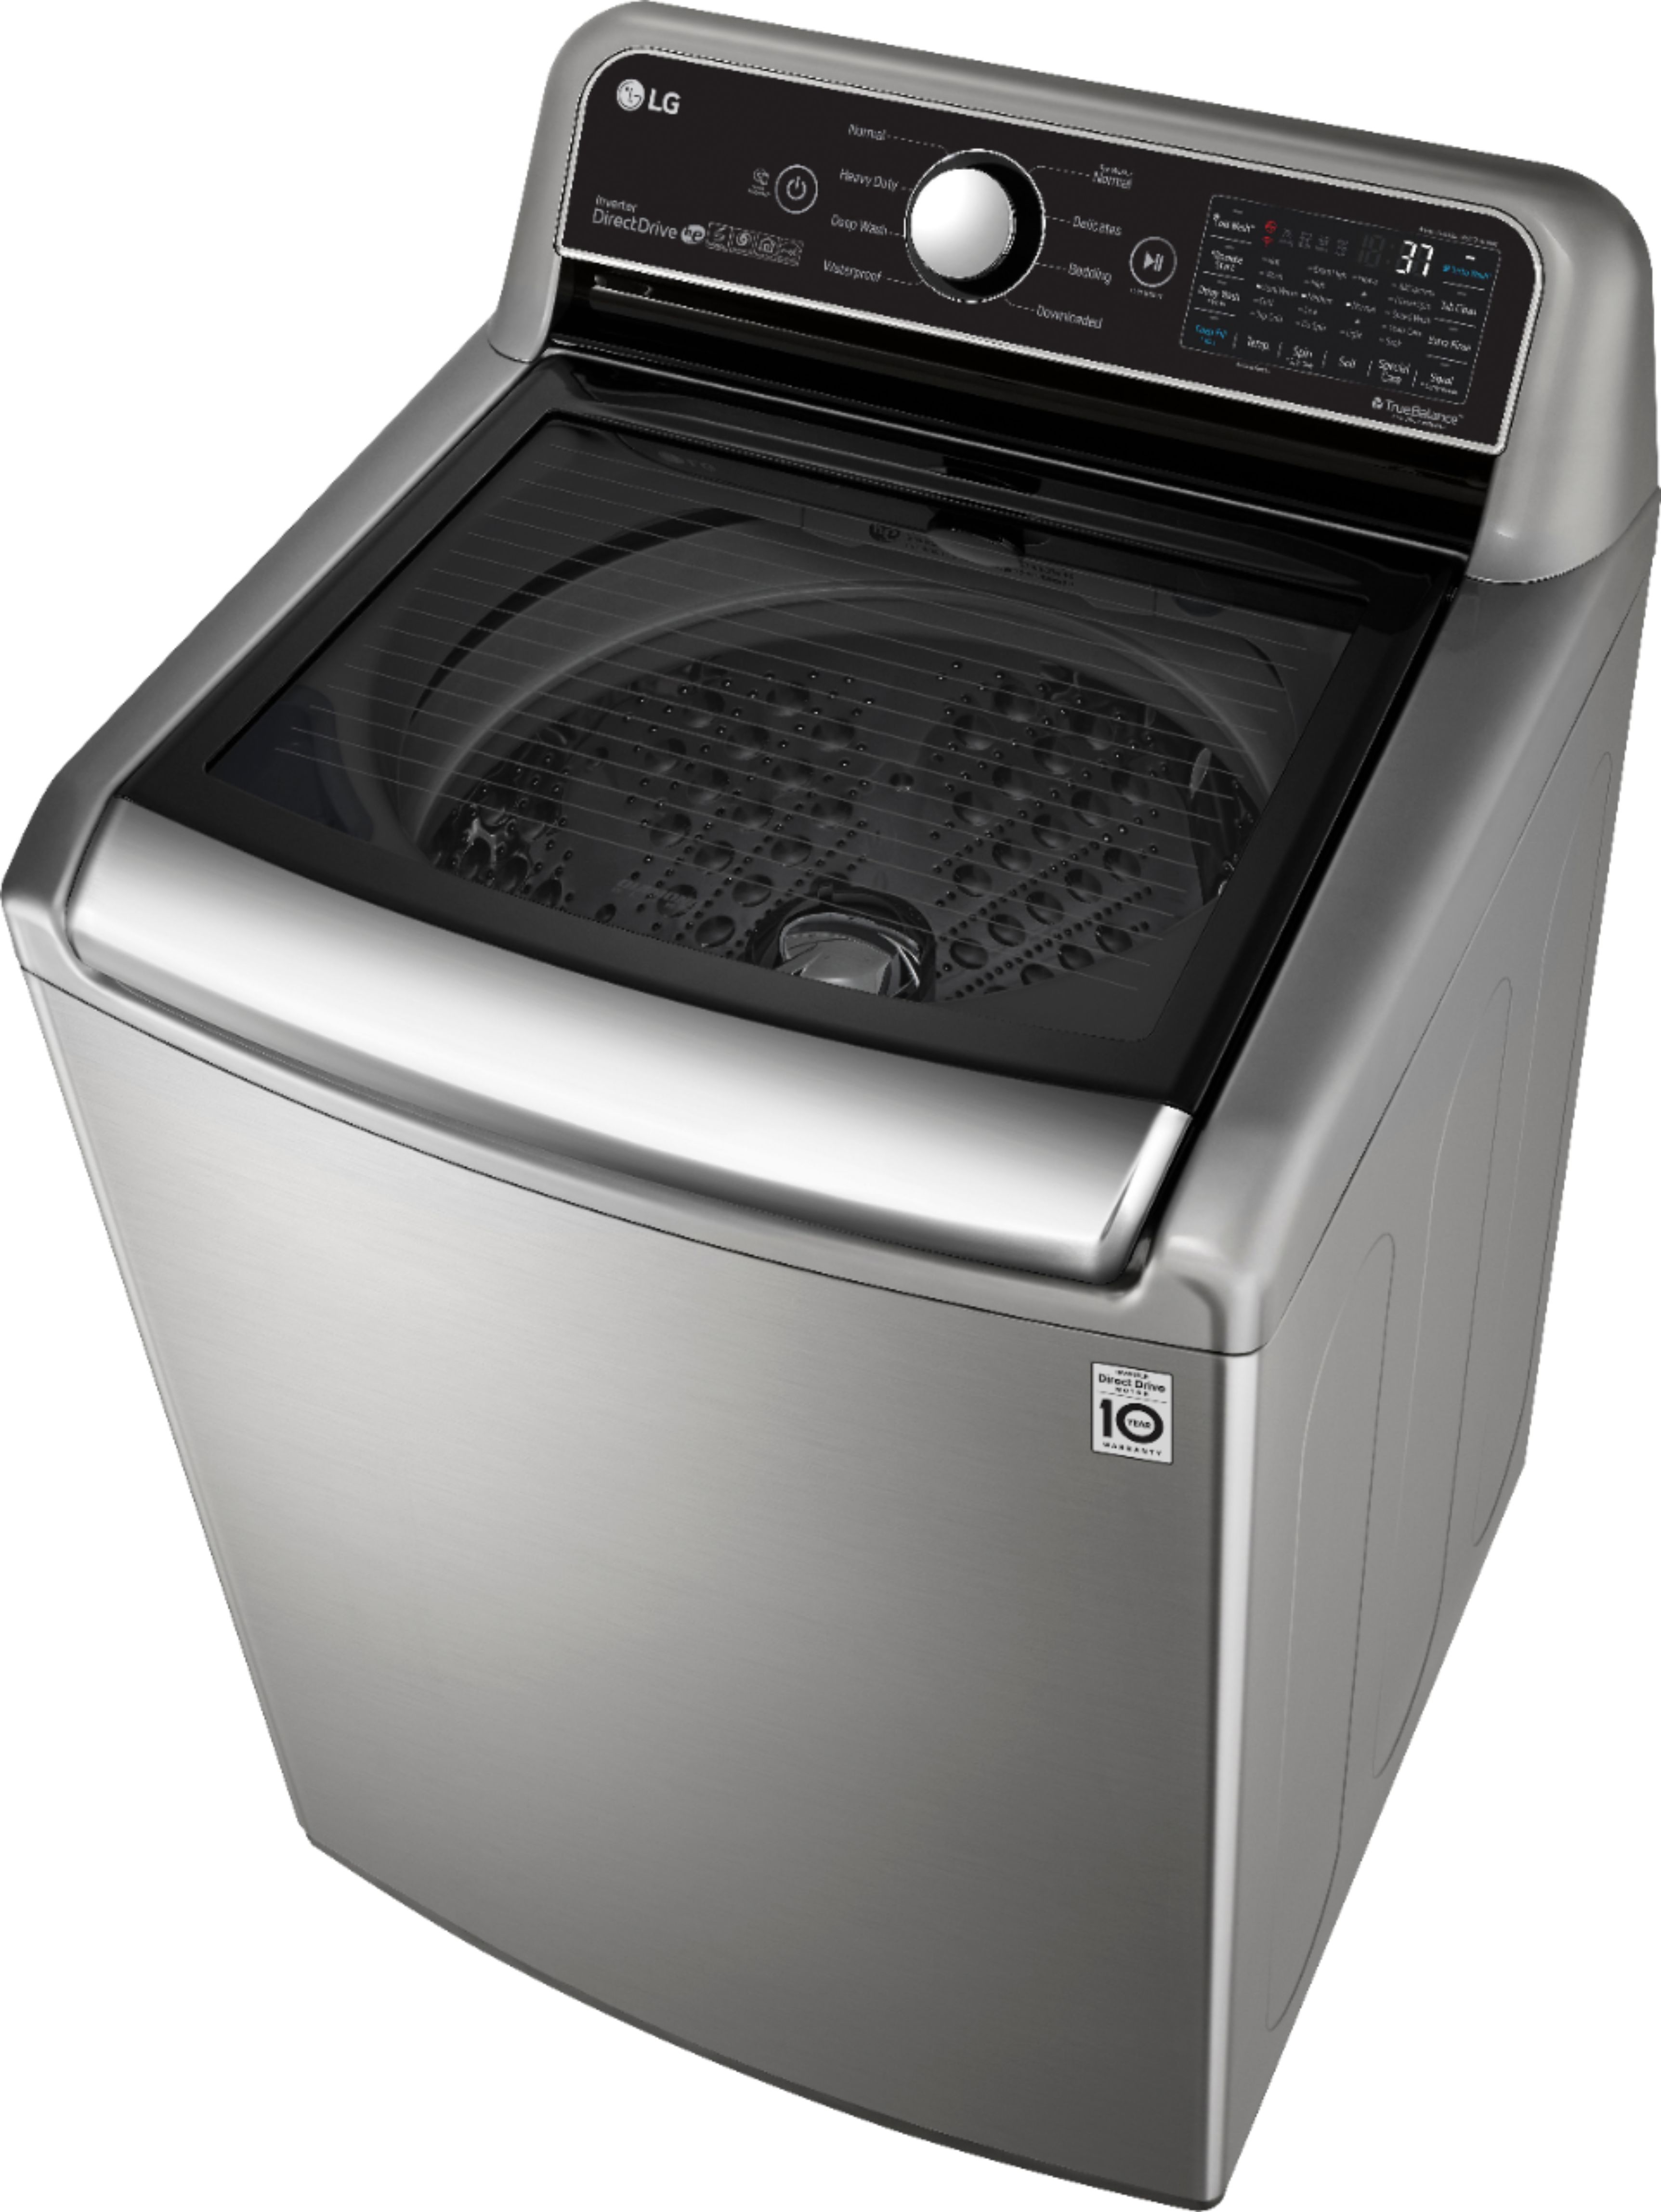 Left View: LG - 4.8 Cu. Ft. High-Efficiency Top Load Washer with 4-Way Agitator and TurboWash 3D - Graphite steel